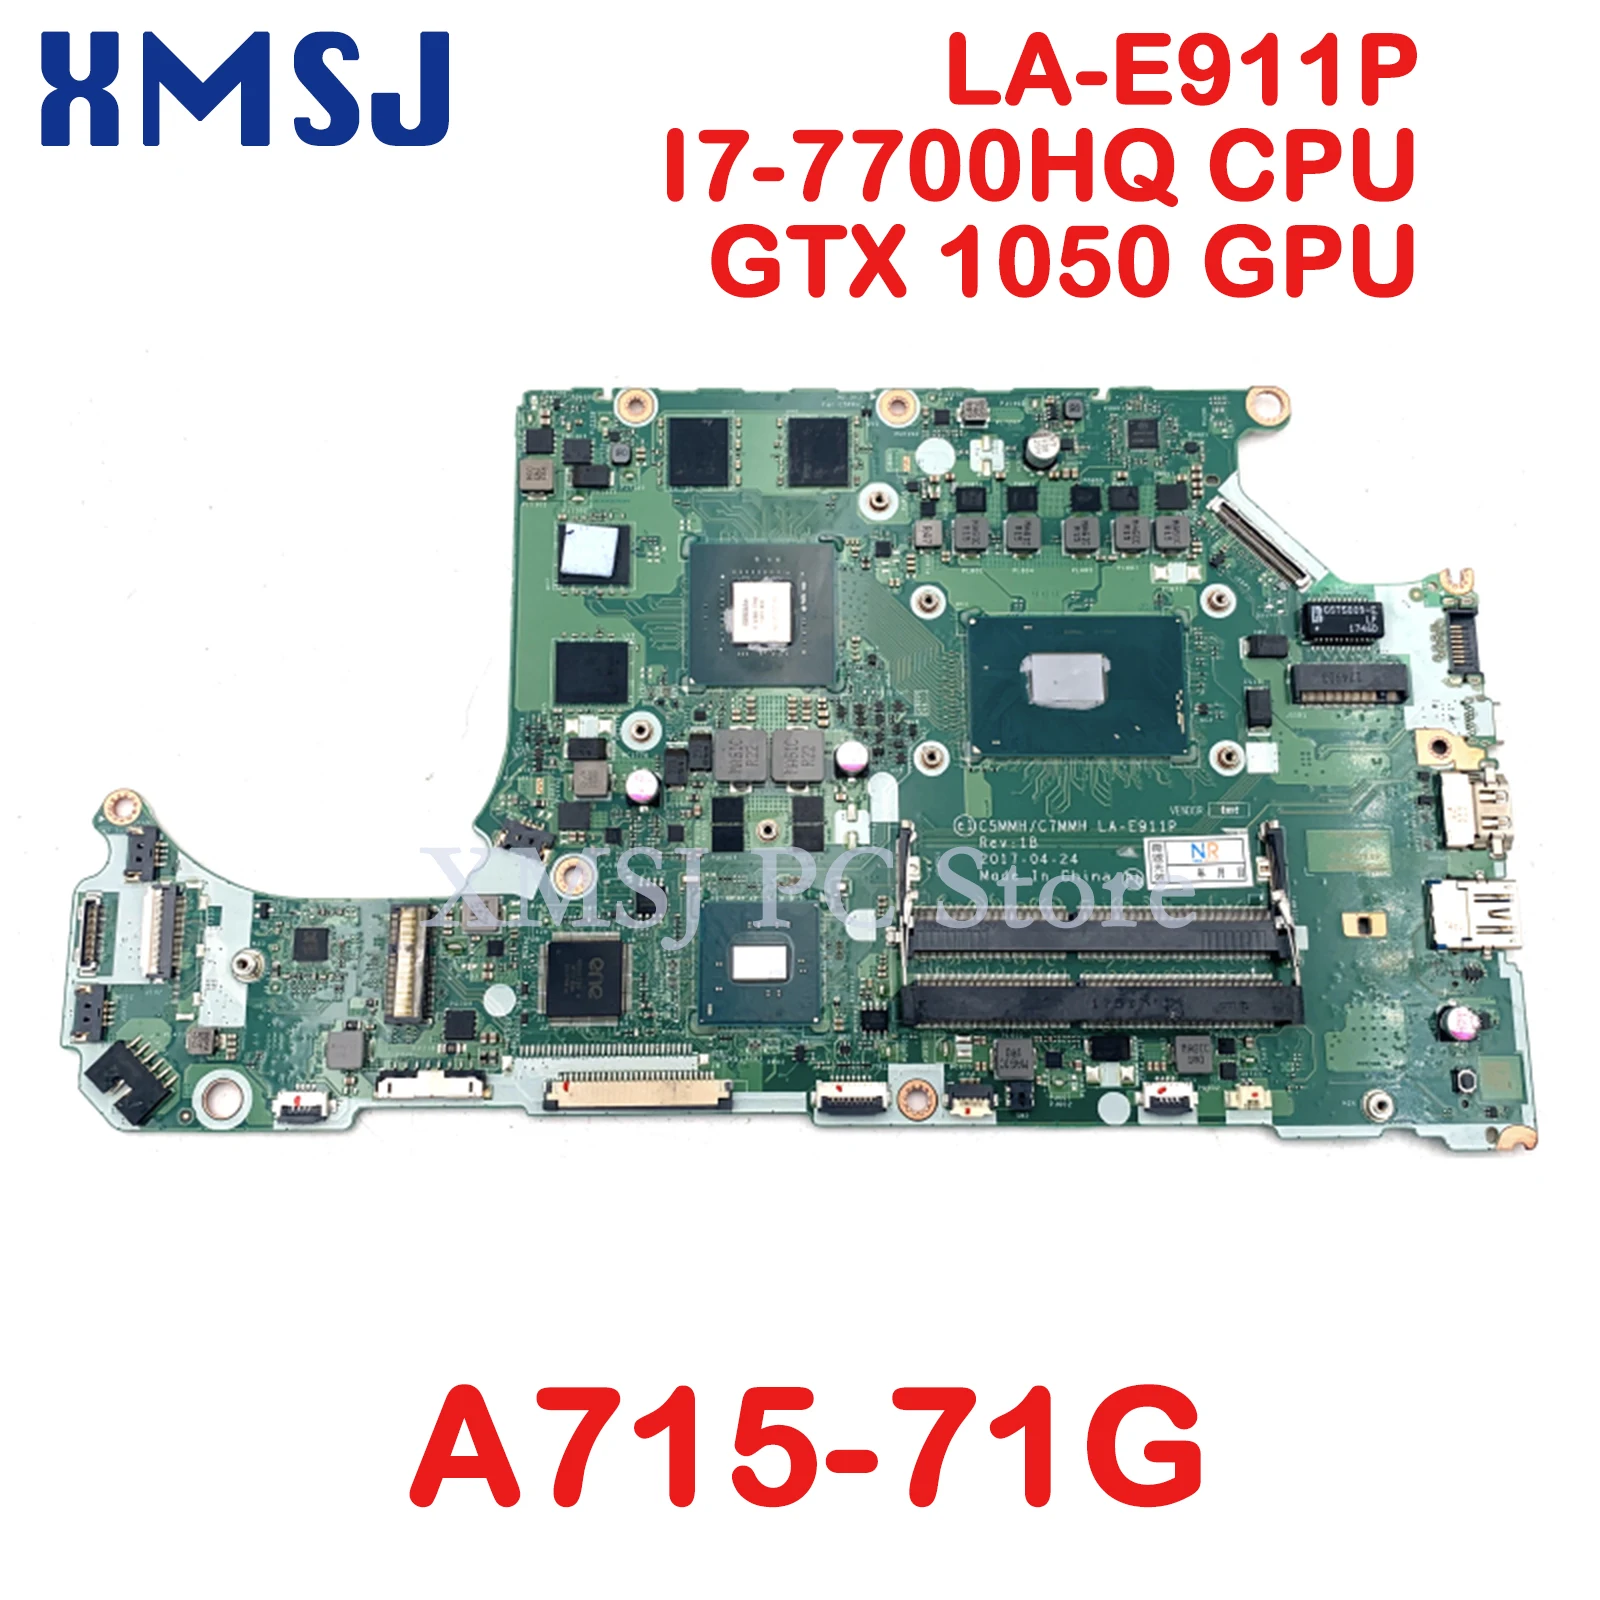 

XMSJ For Acer A715-71G Laptop Motherboard C5MMH C7MMH LA-E911P NBQ2Q11007 NB.Q2Q11.007 SR32Q I7-7700HQ CPU GTX 1050 GPU